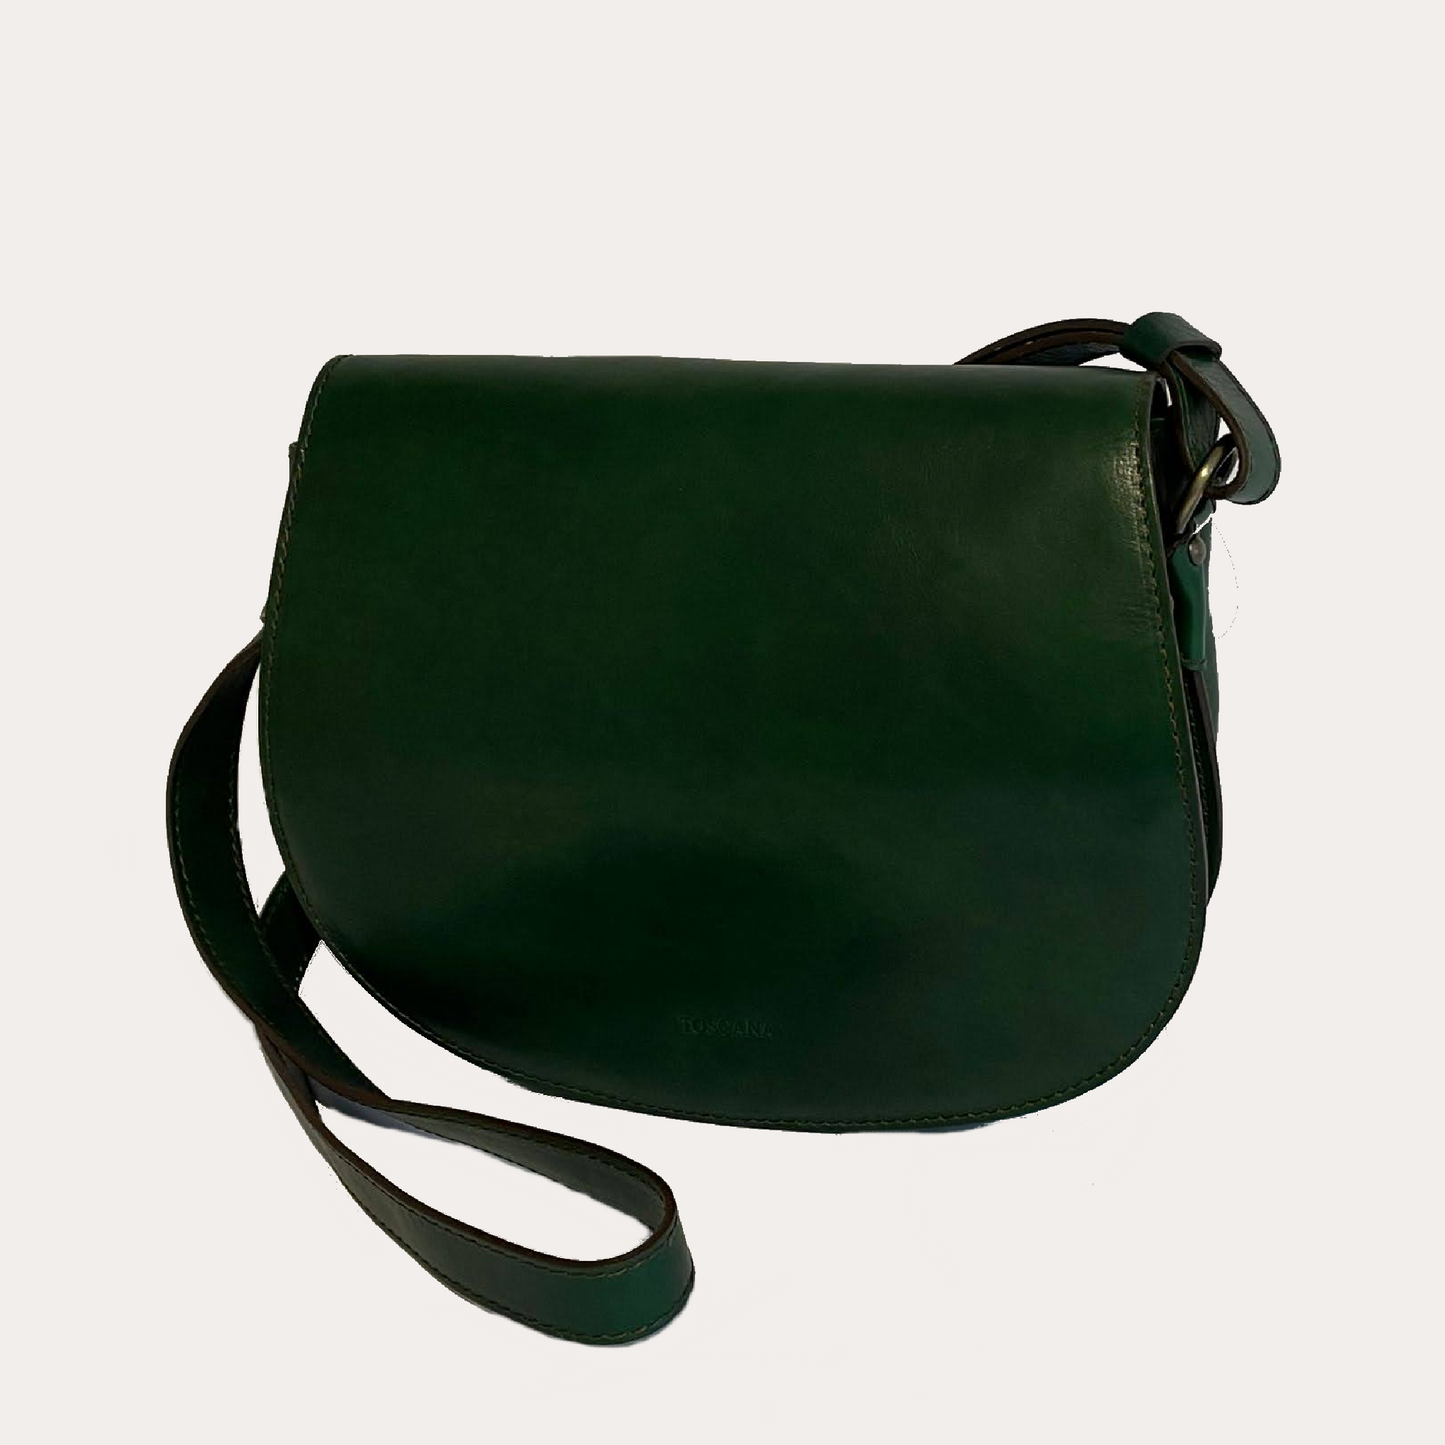 Green Leather Flapover Bag